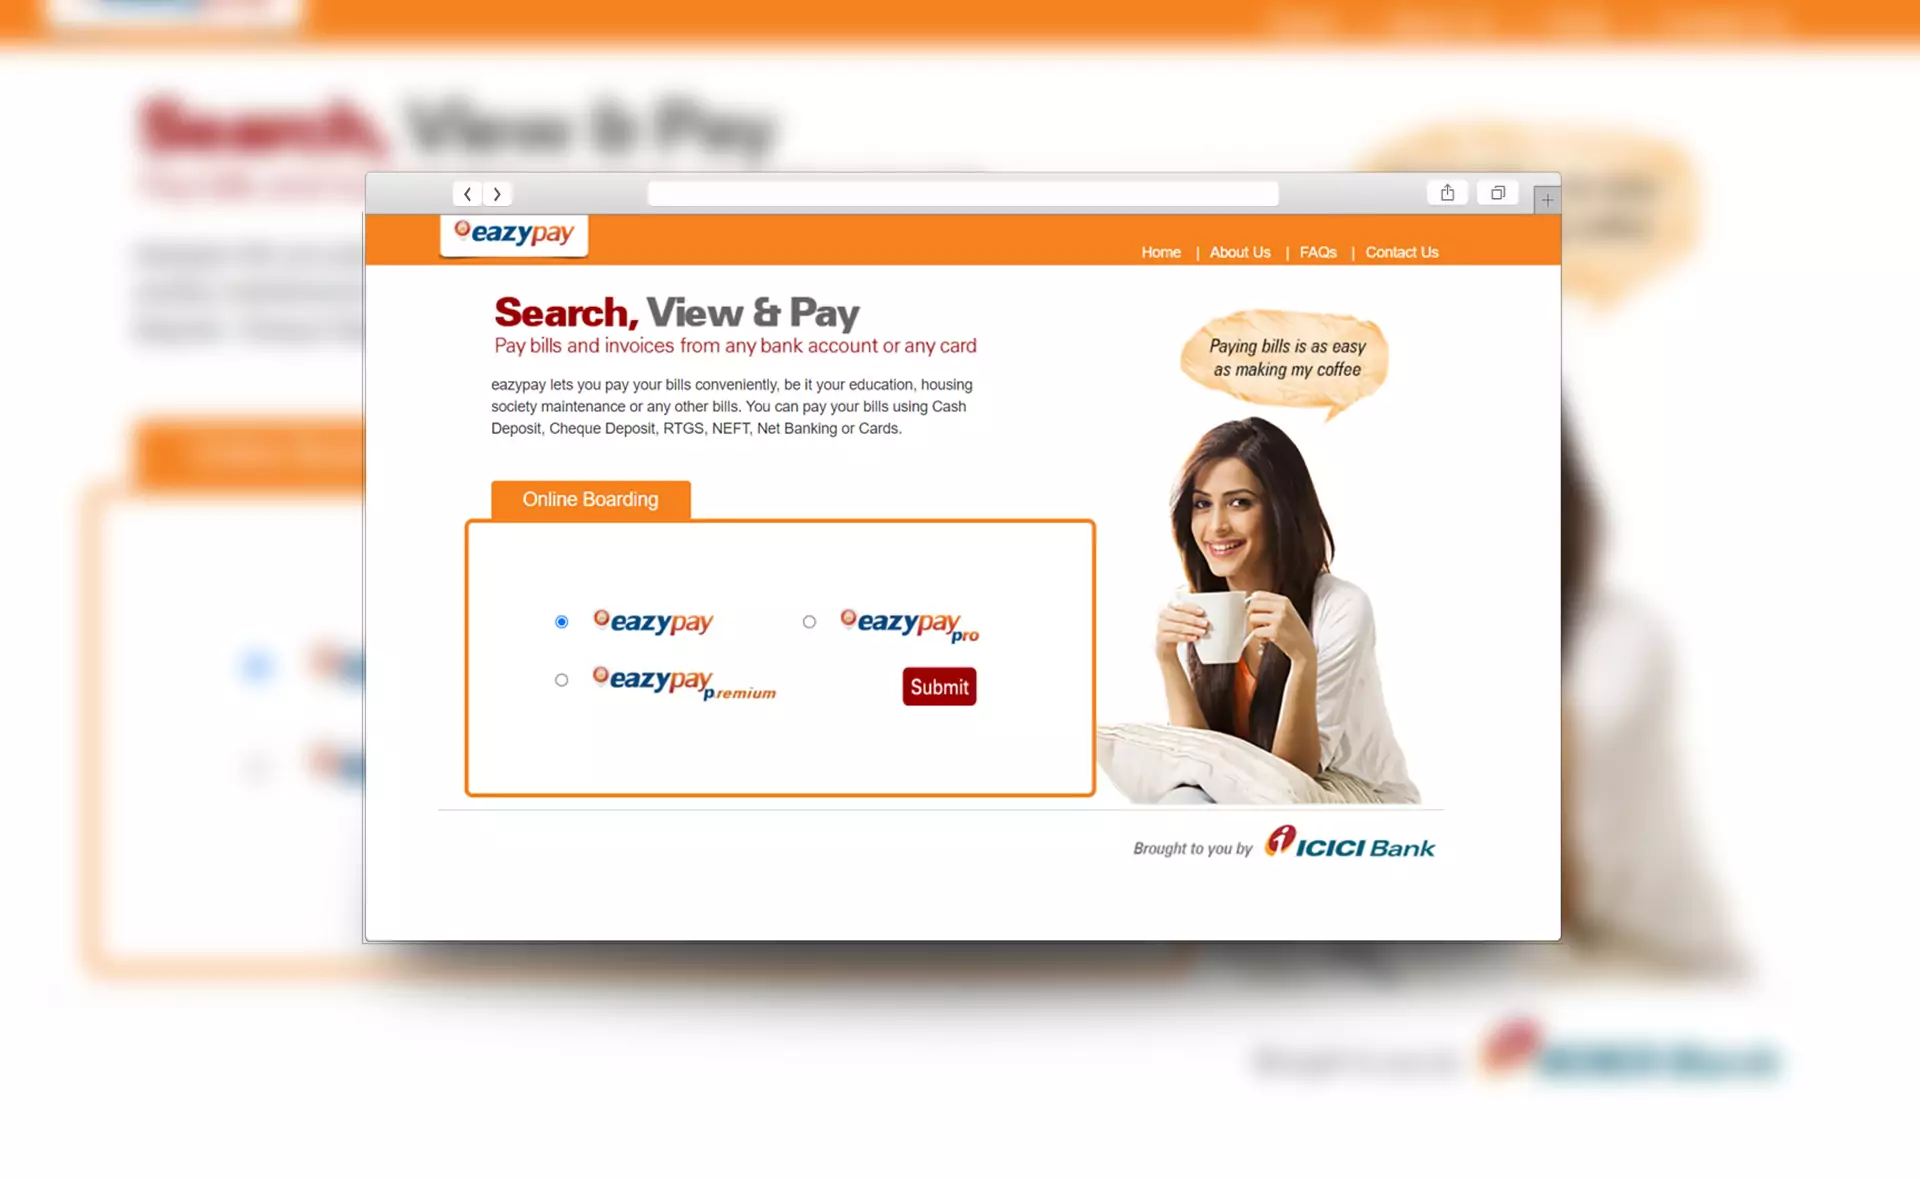 You need an ICICI bank account in order to use Eazypay.